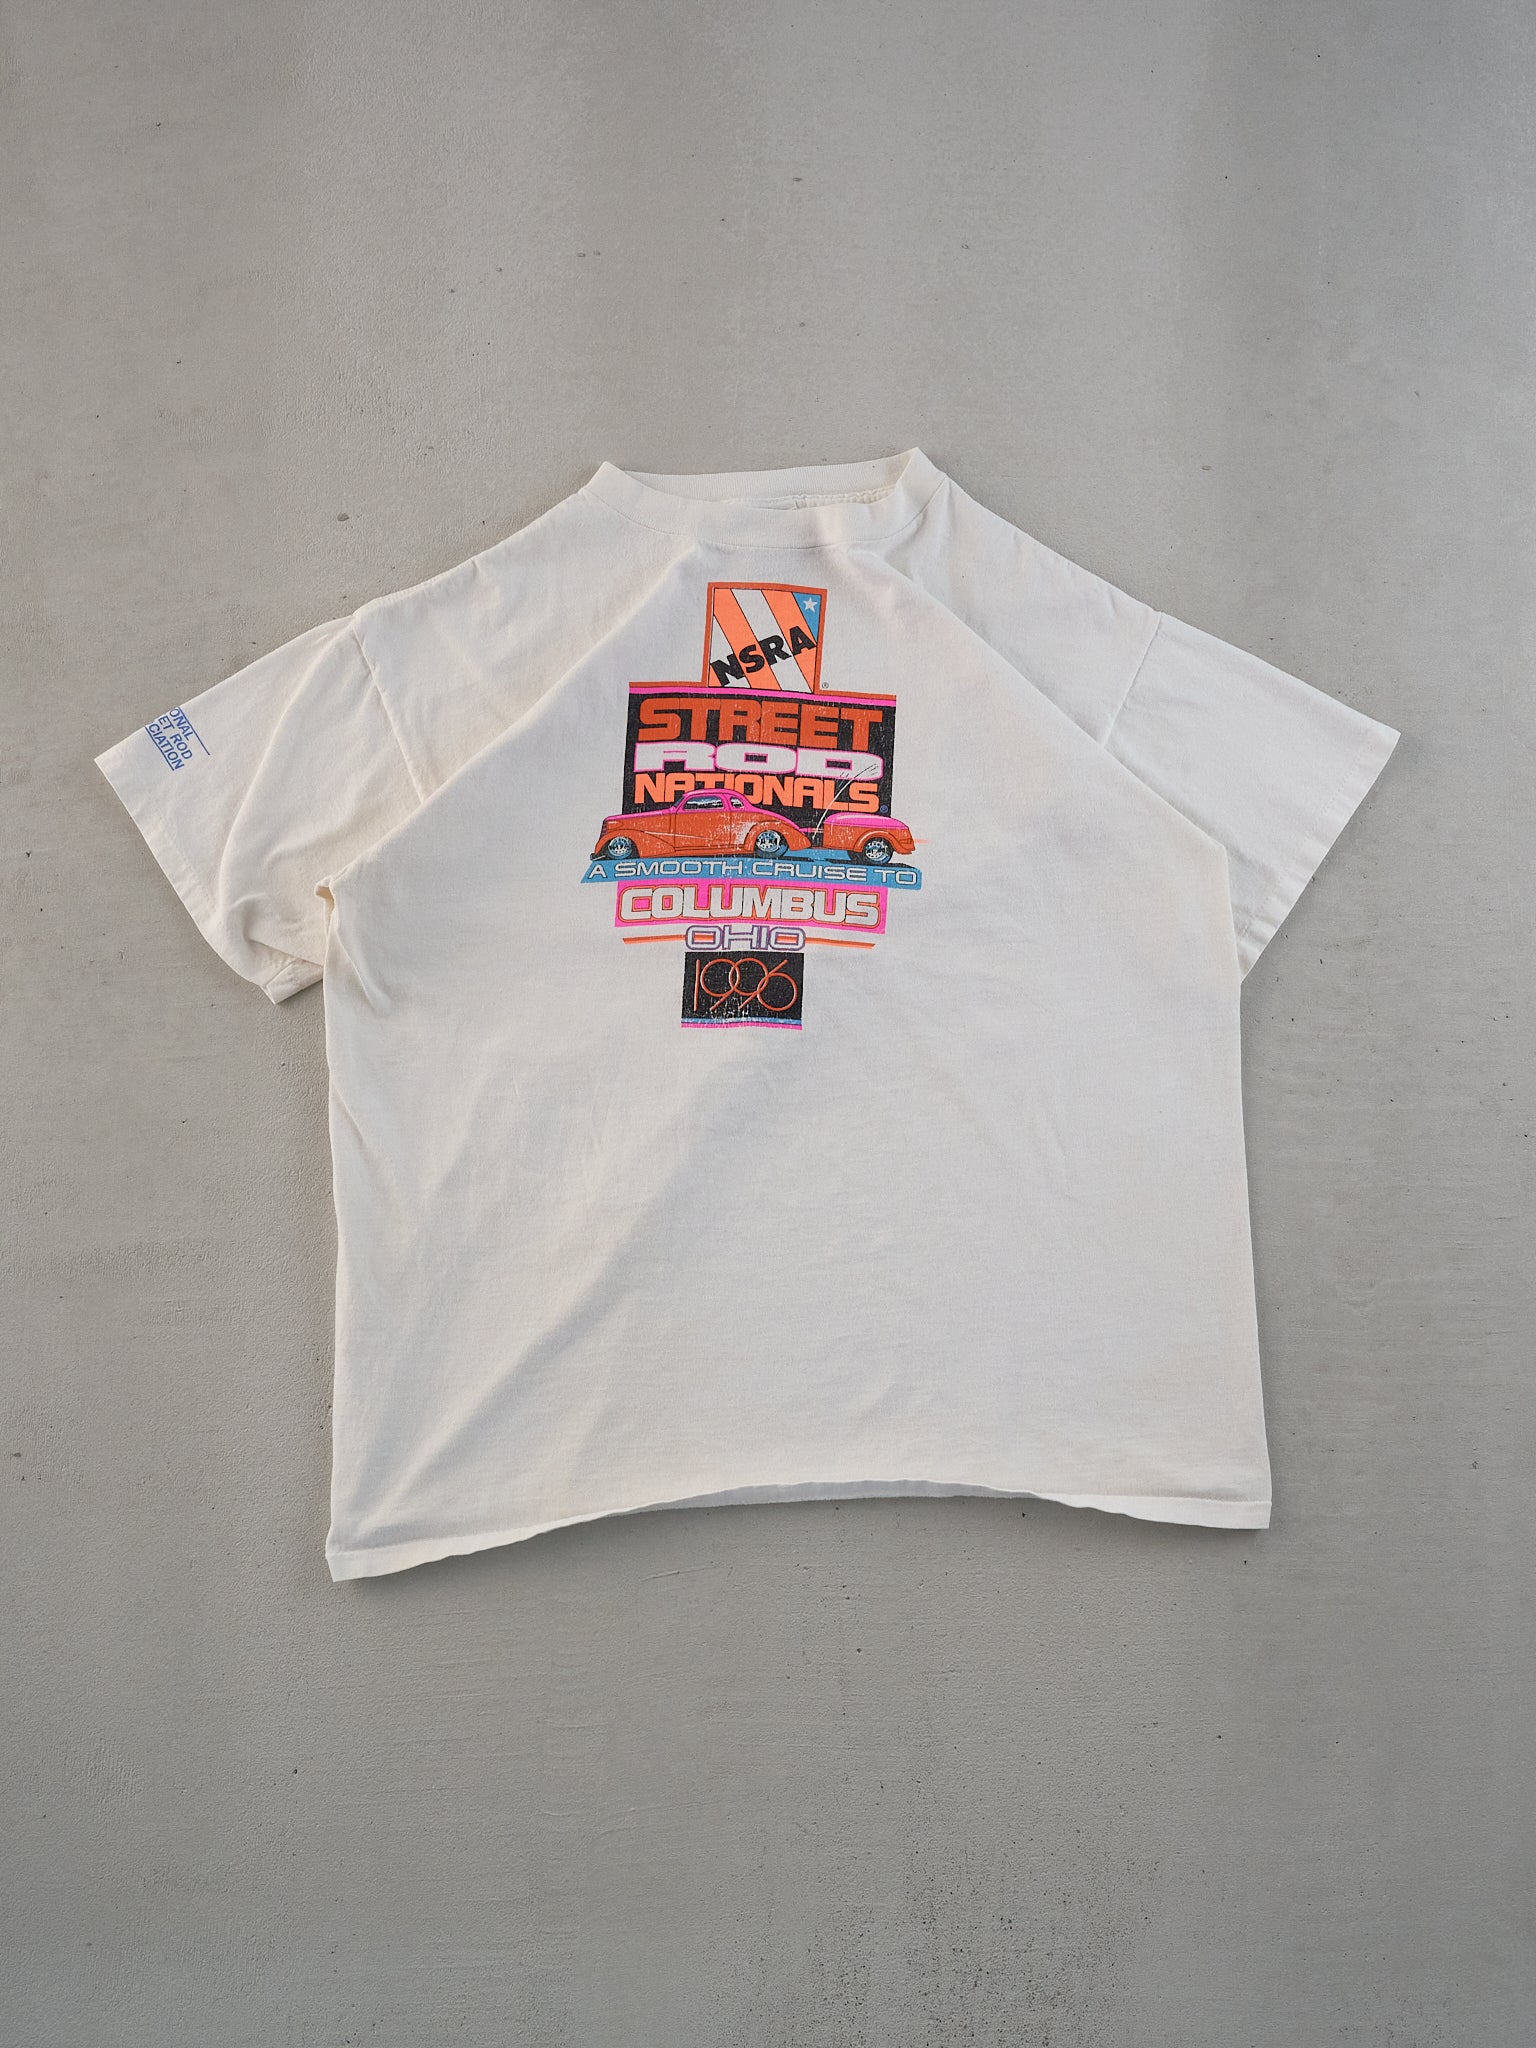 Vintage 96' White Single Stitched NSRA Street Rod Nationals Ohio Graphic Tee (L)